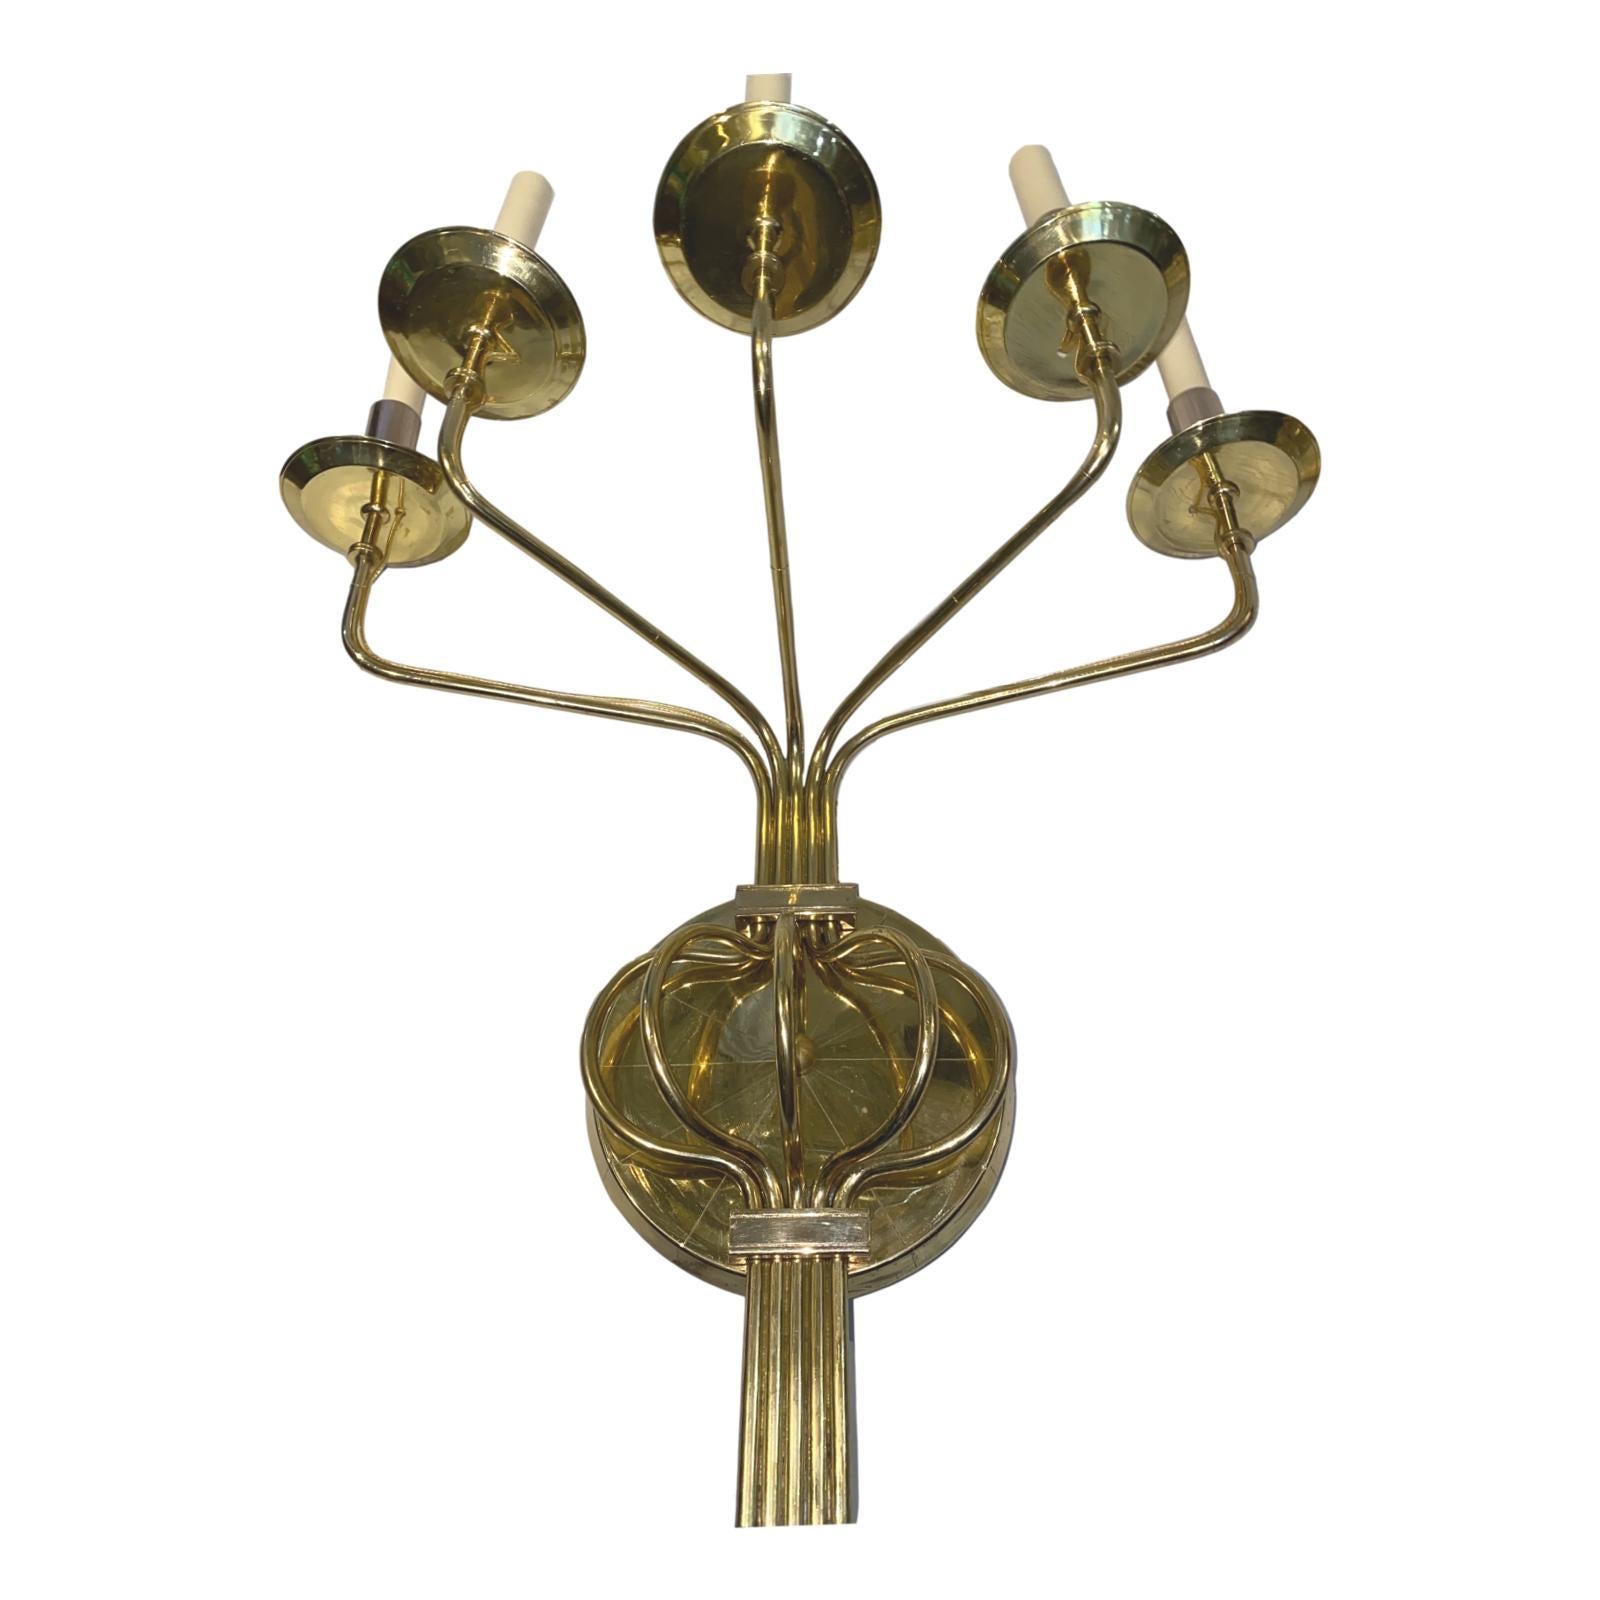 A set of 4 large circa 1960s Italian five-arm sconces with original gilt finish.
Measurements:
Height 25